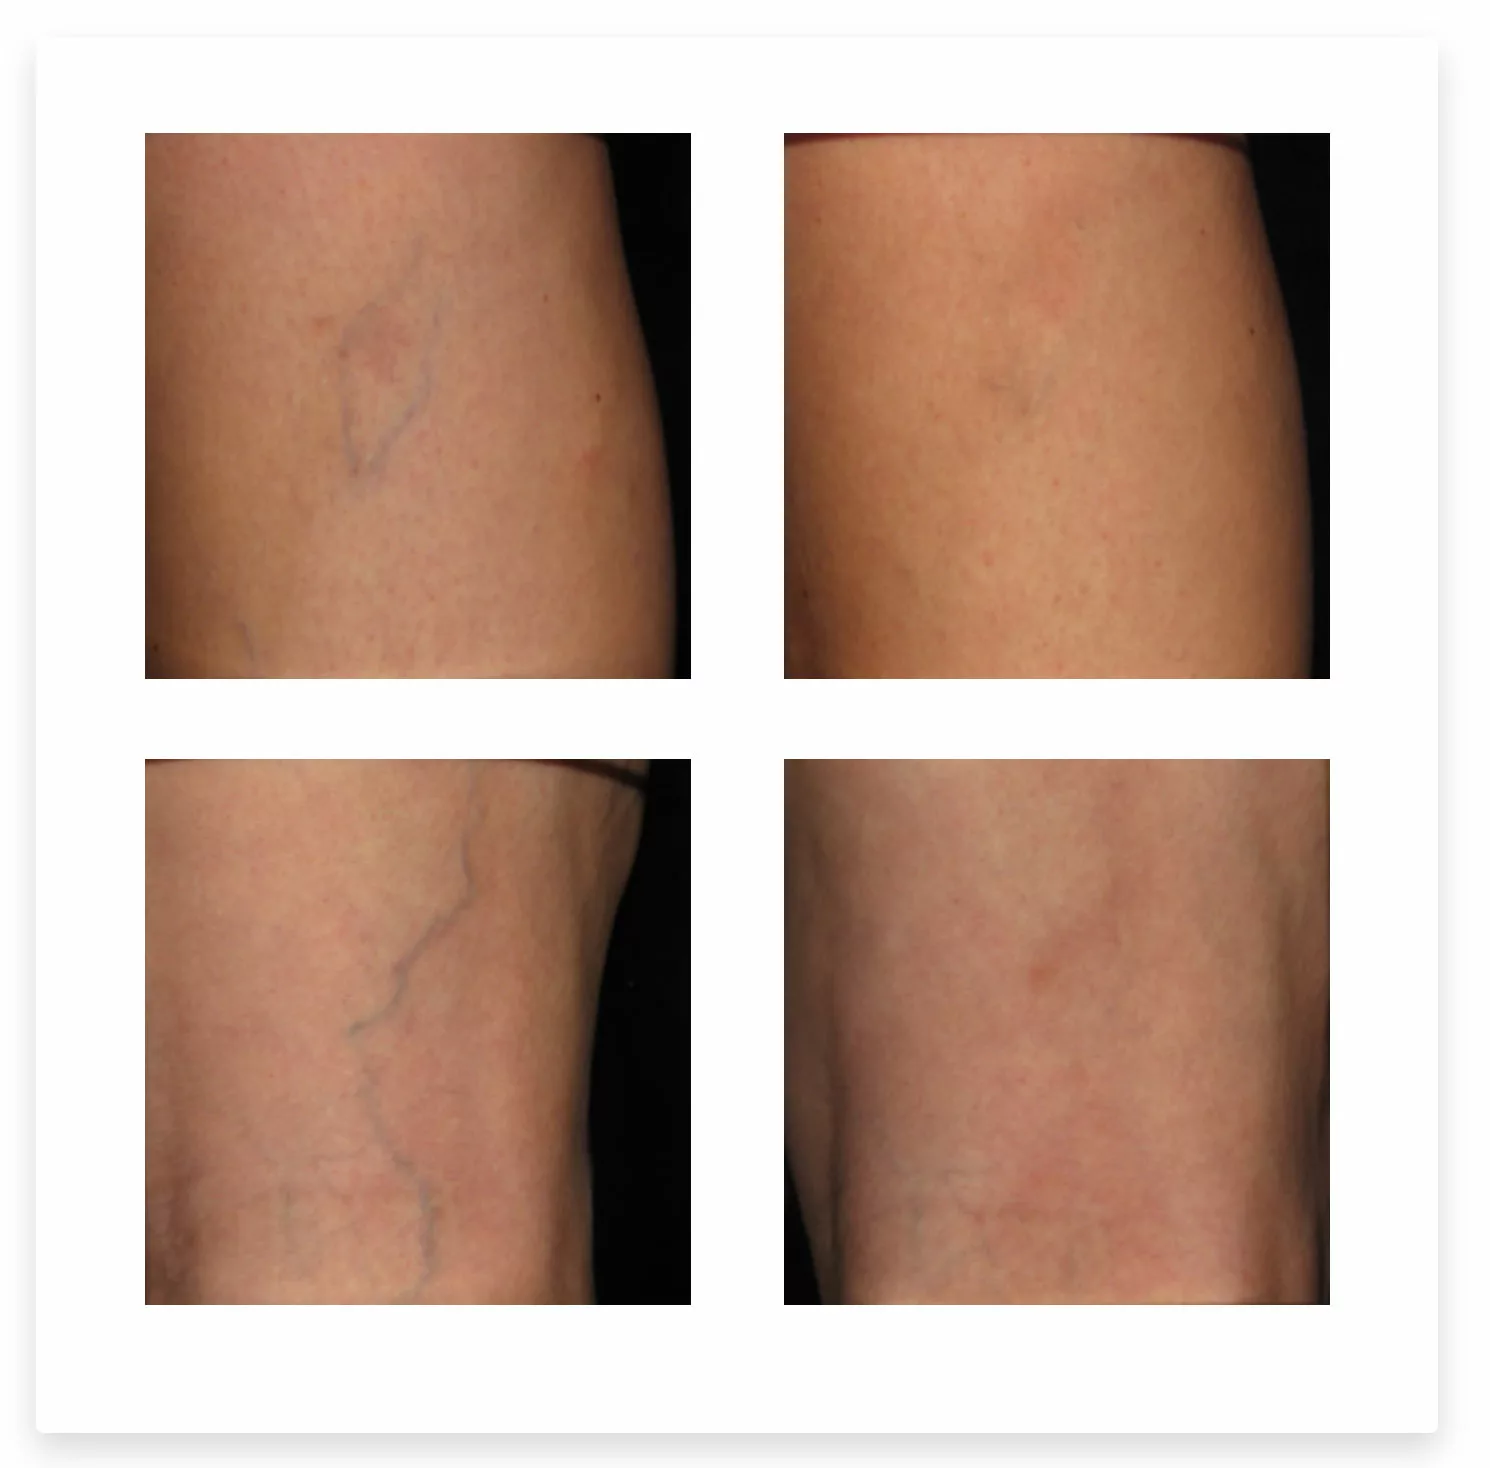 Spider vein treatment with Aesclera at SANTÉ Aesthetics & Wellnes in Portland, Oregon BEFORE & AFTER PHOTO